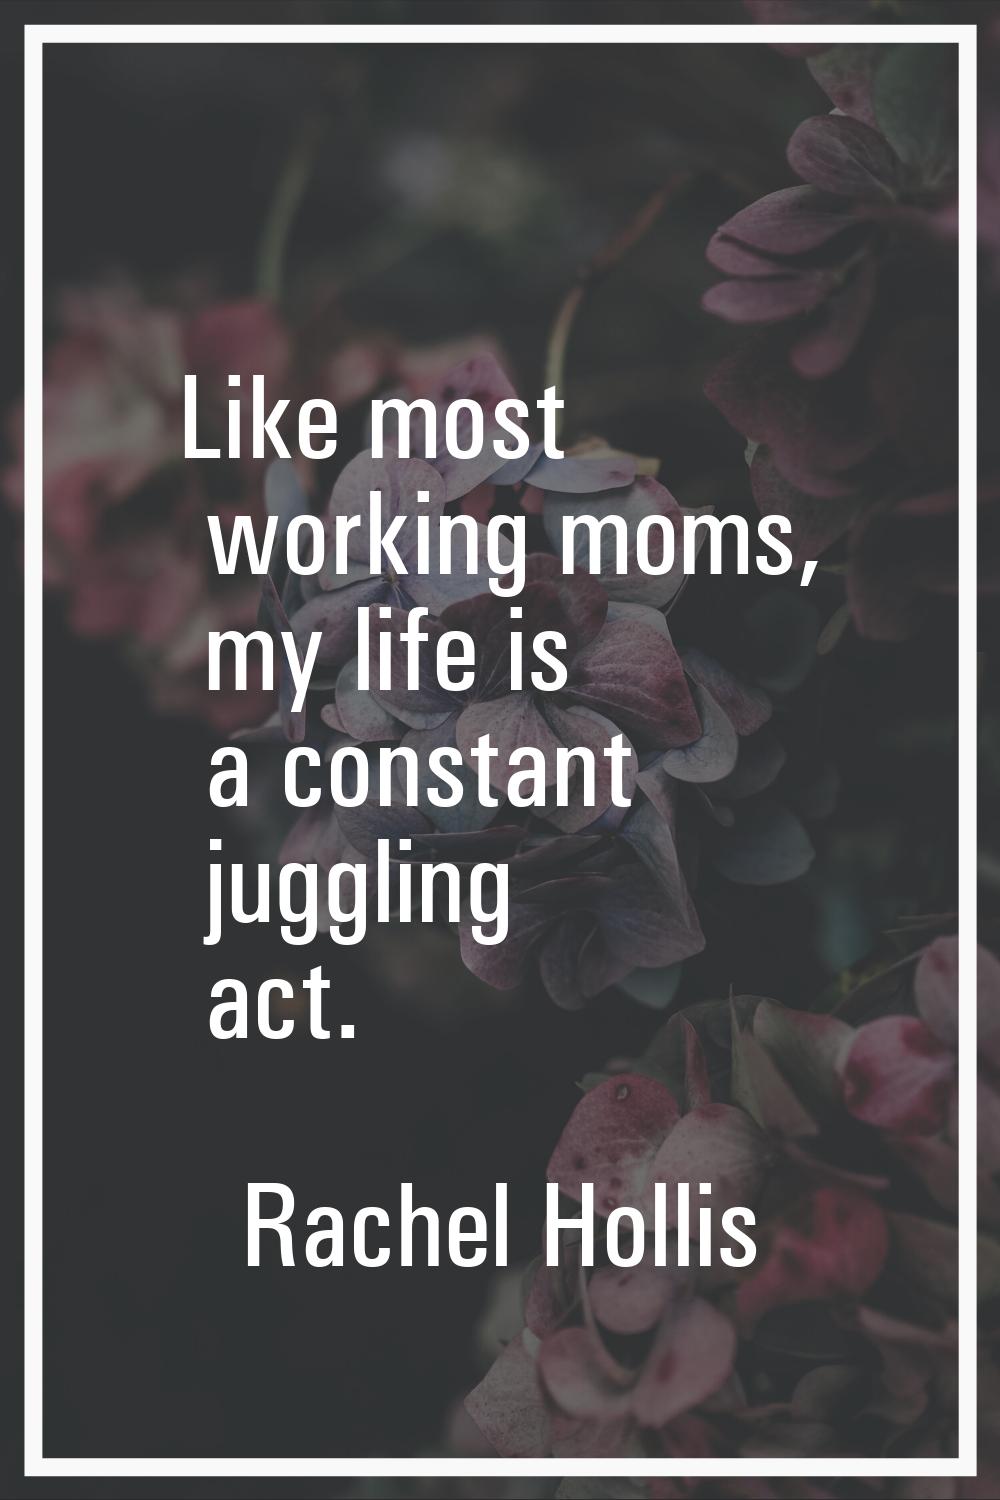 Like most working moms, my life is a constant juggling act.